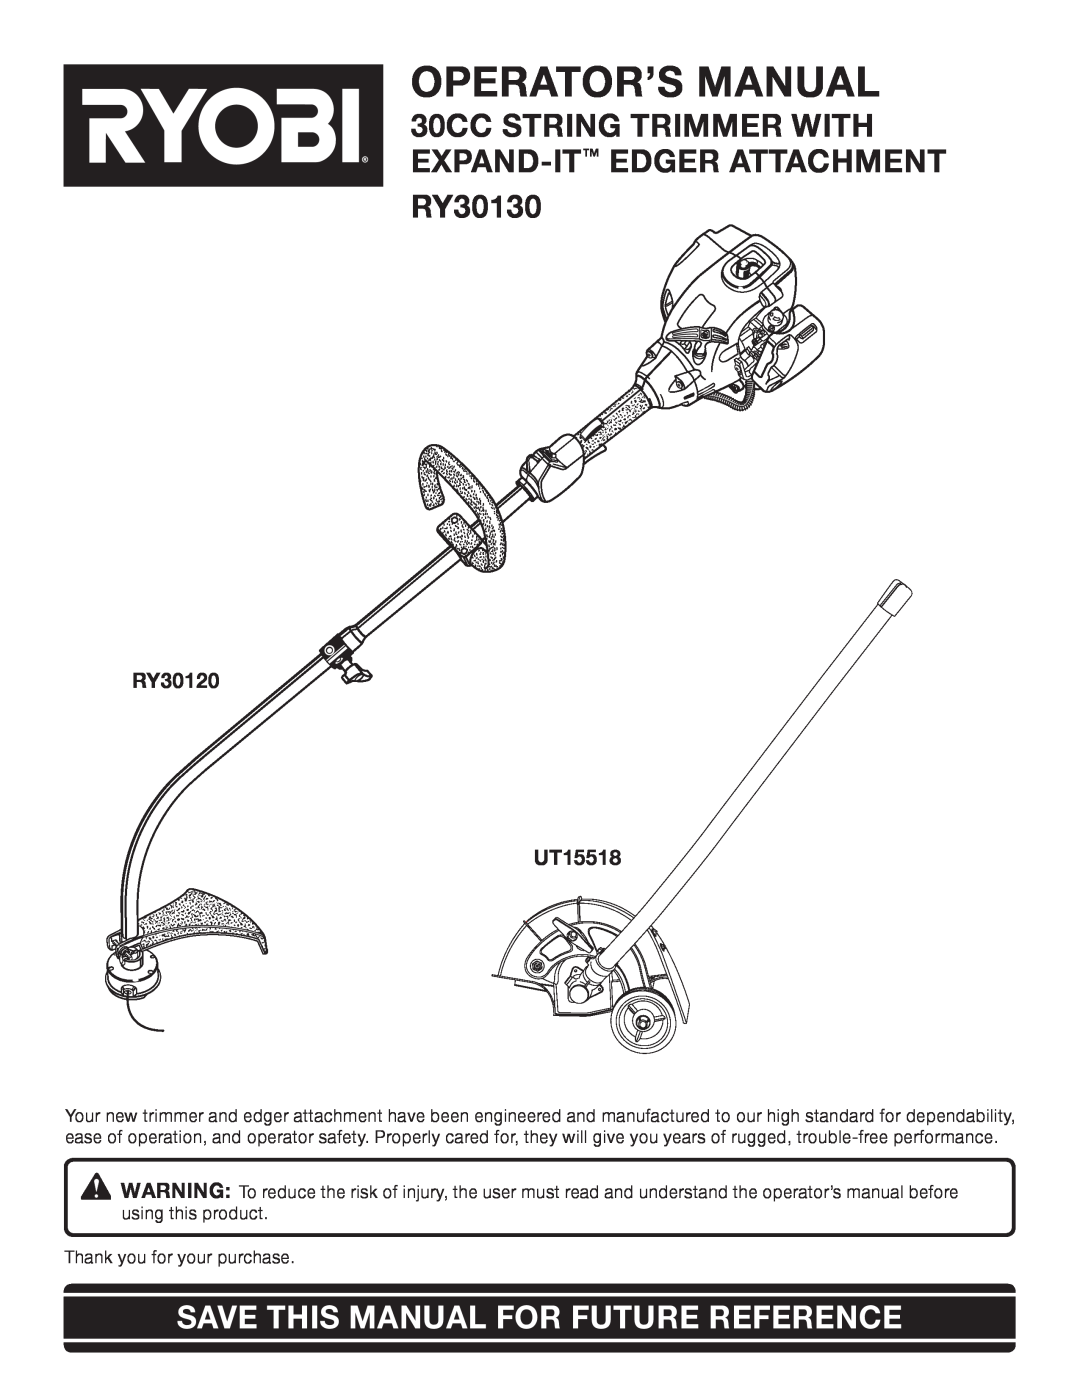 Ryobi Outdoor RY30130 manual Operator’S Manual, Save This Manual For Future Reference, RY30120 UT15518 